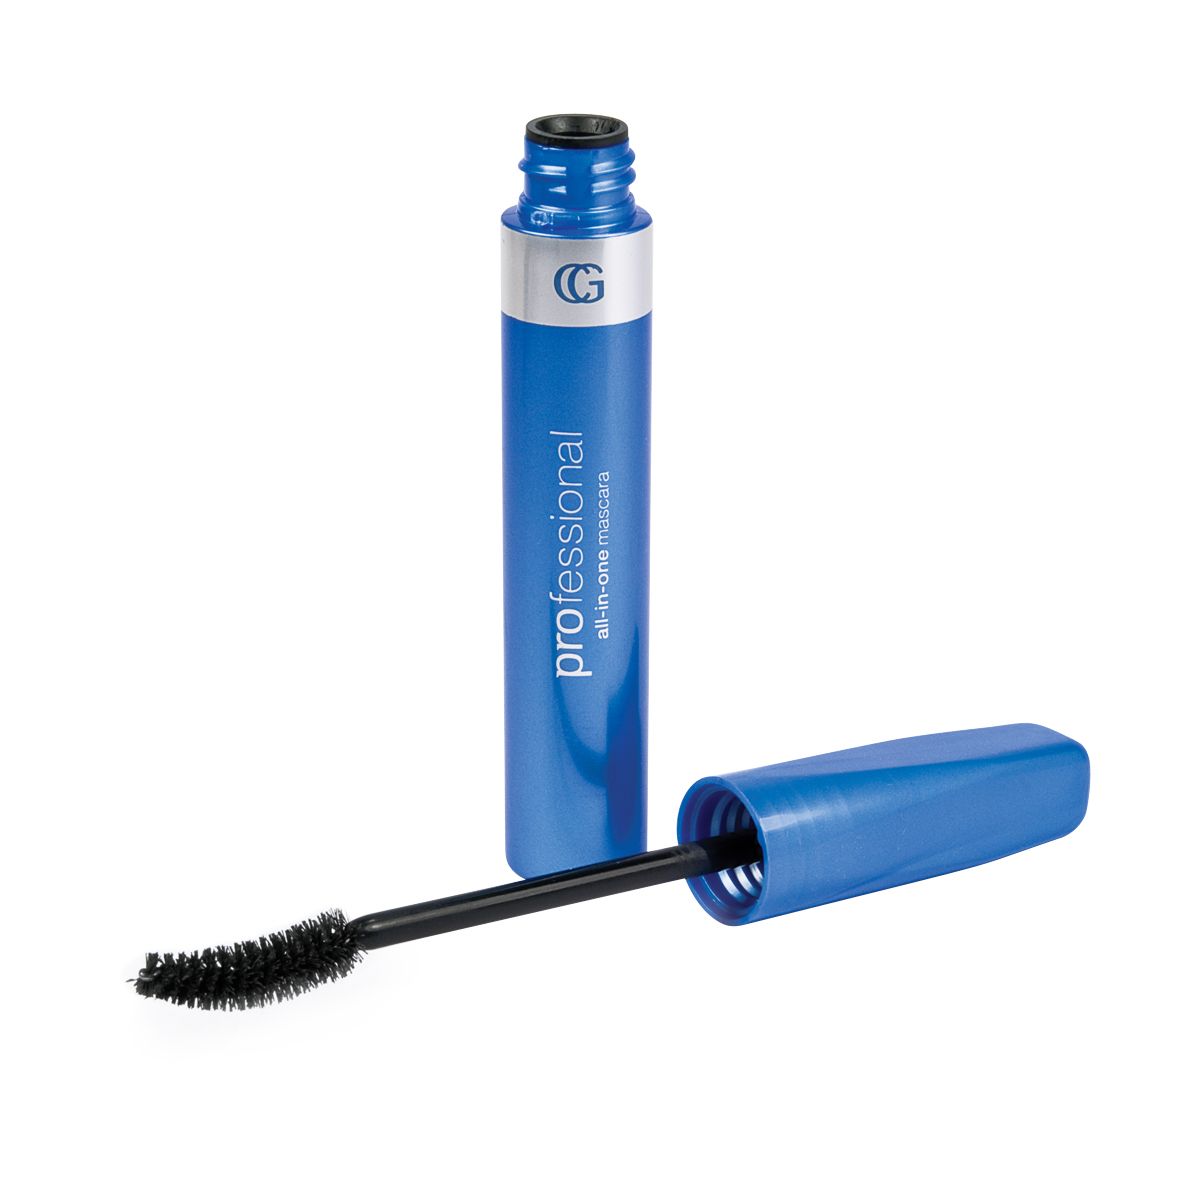 CoverGirl Professional Curved Brush Smudgeproof Mascara